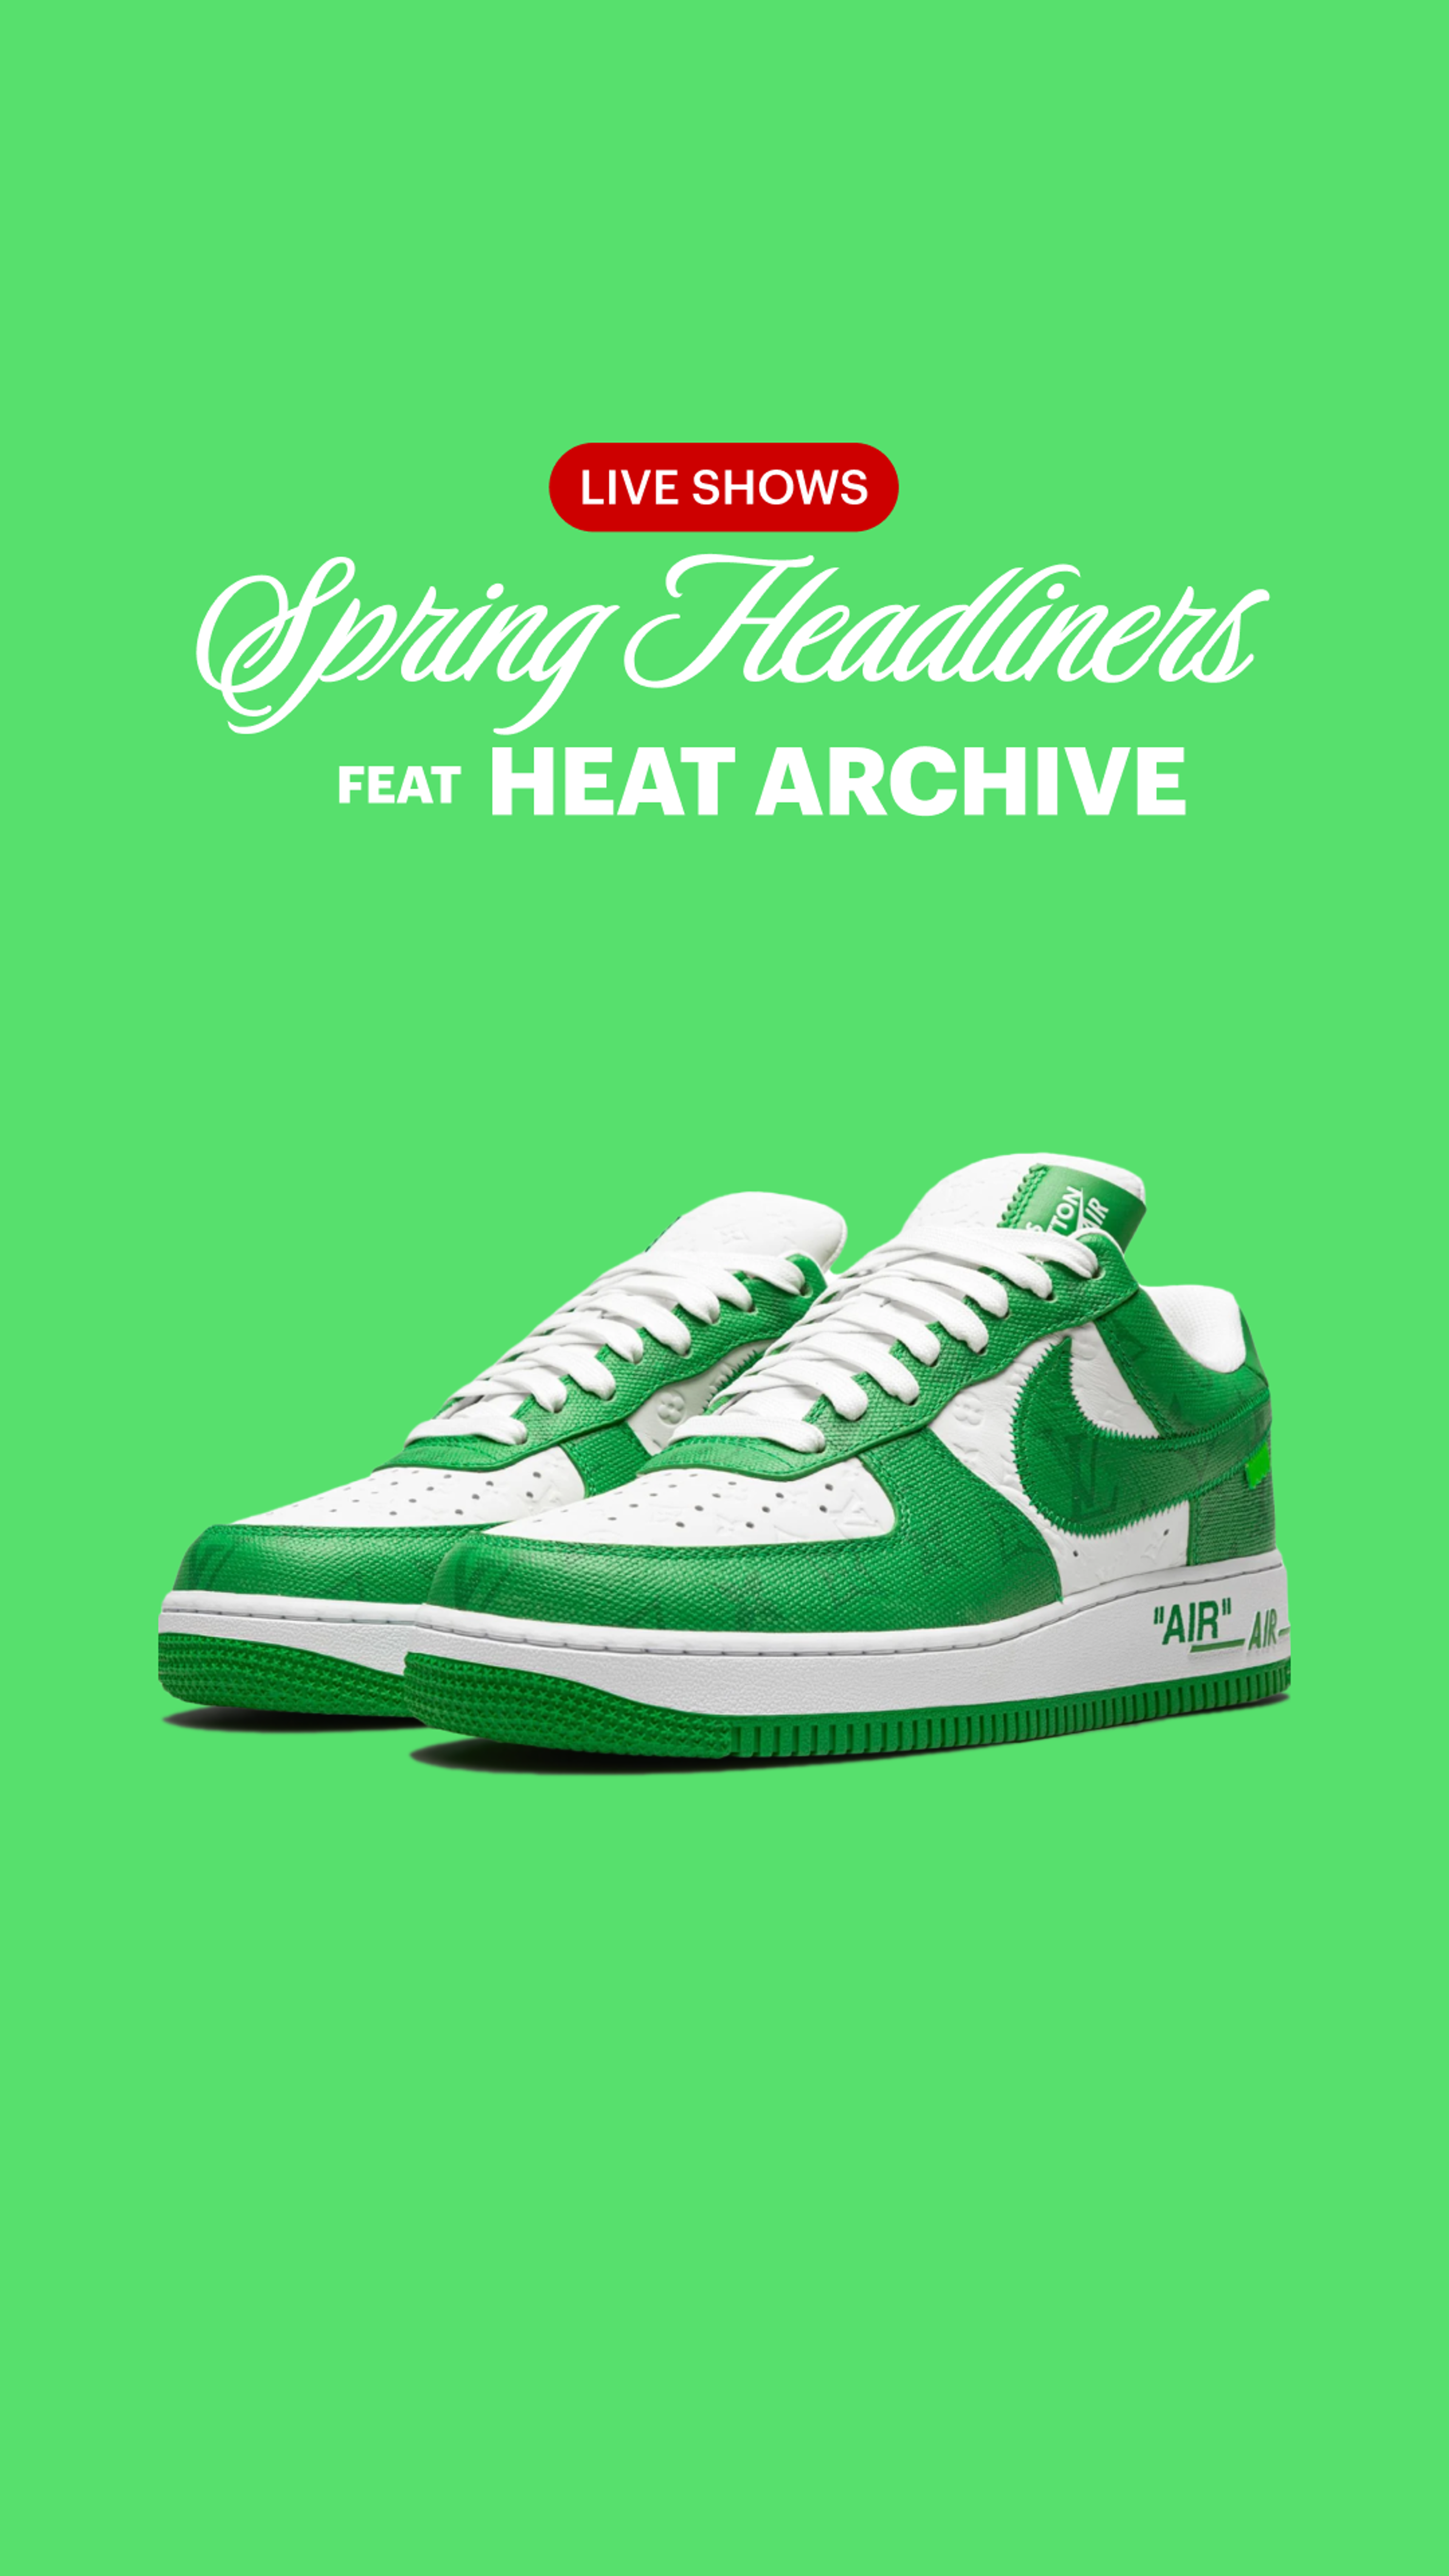 Preview image for the show titled "Spring Shopping Guide with Heat Archive" at Monday @ 9:30 PM